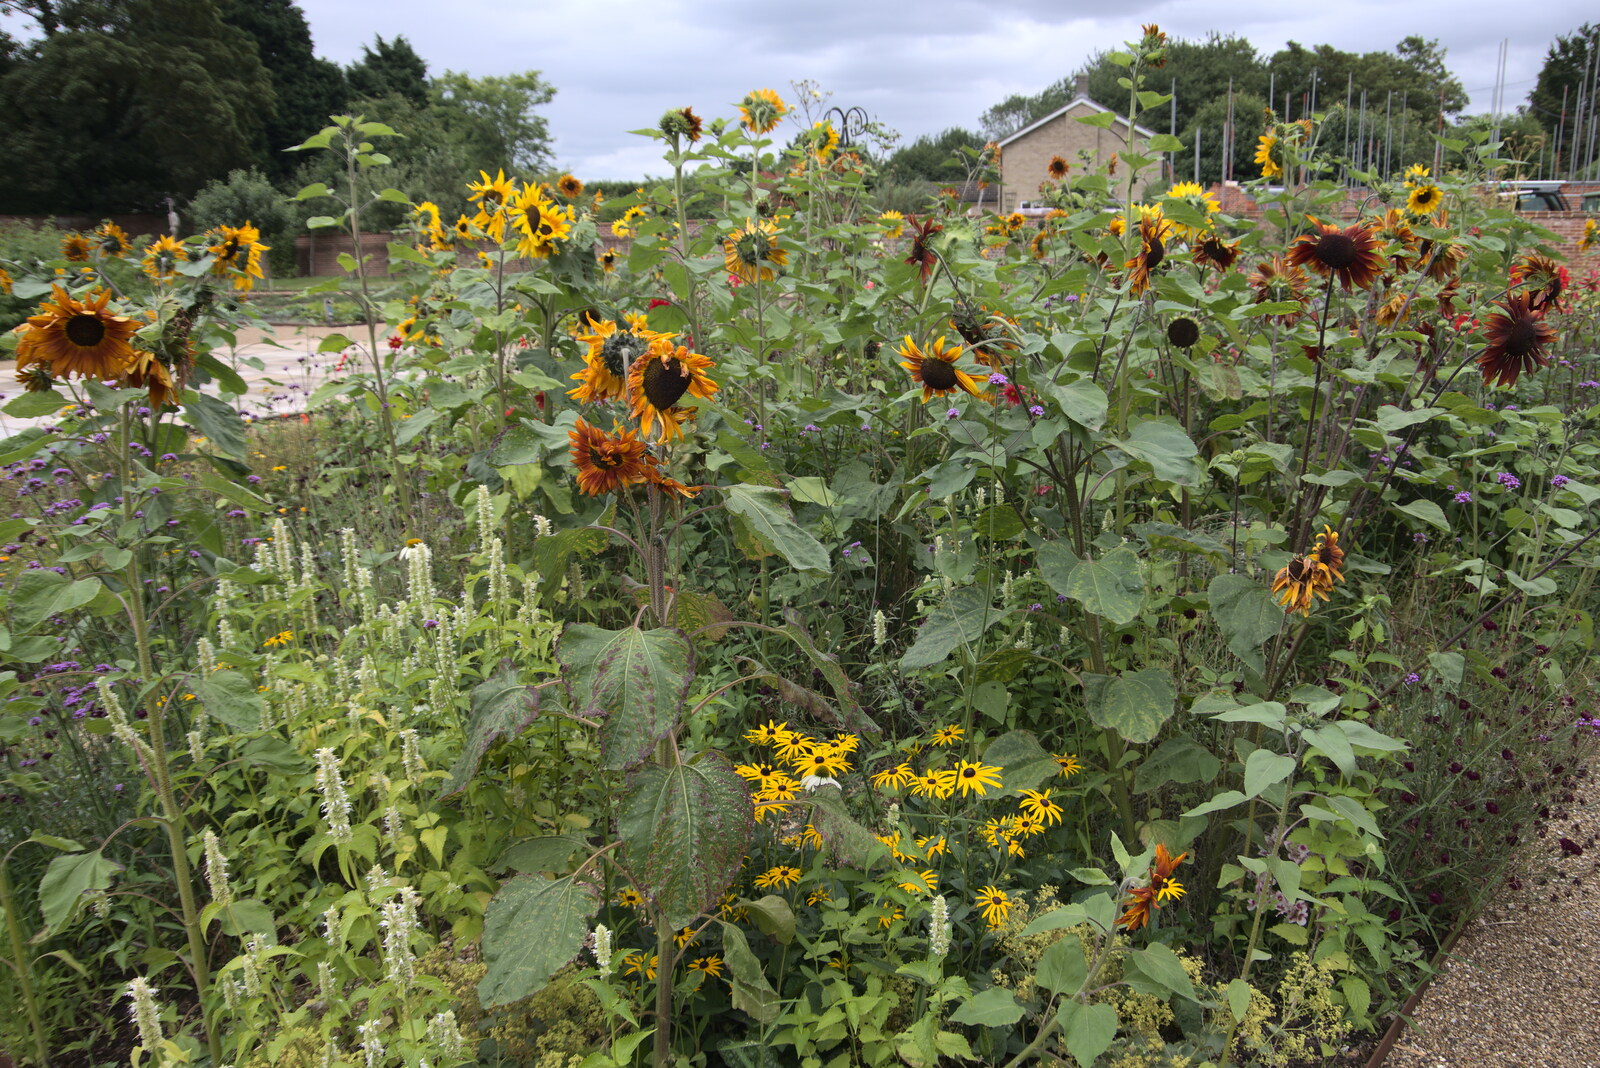 Sunflowers down at the Oaksmere from Meg-fest, and Sean Visits, Bressingham and Brome, Suffolk - 1st August 2021